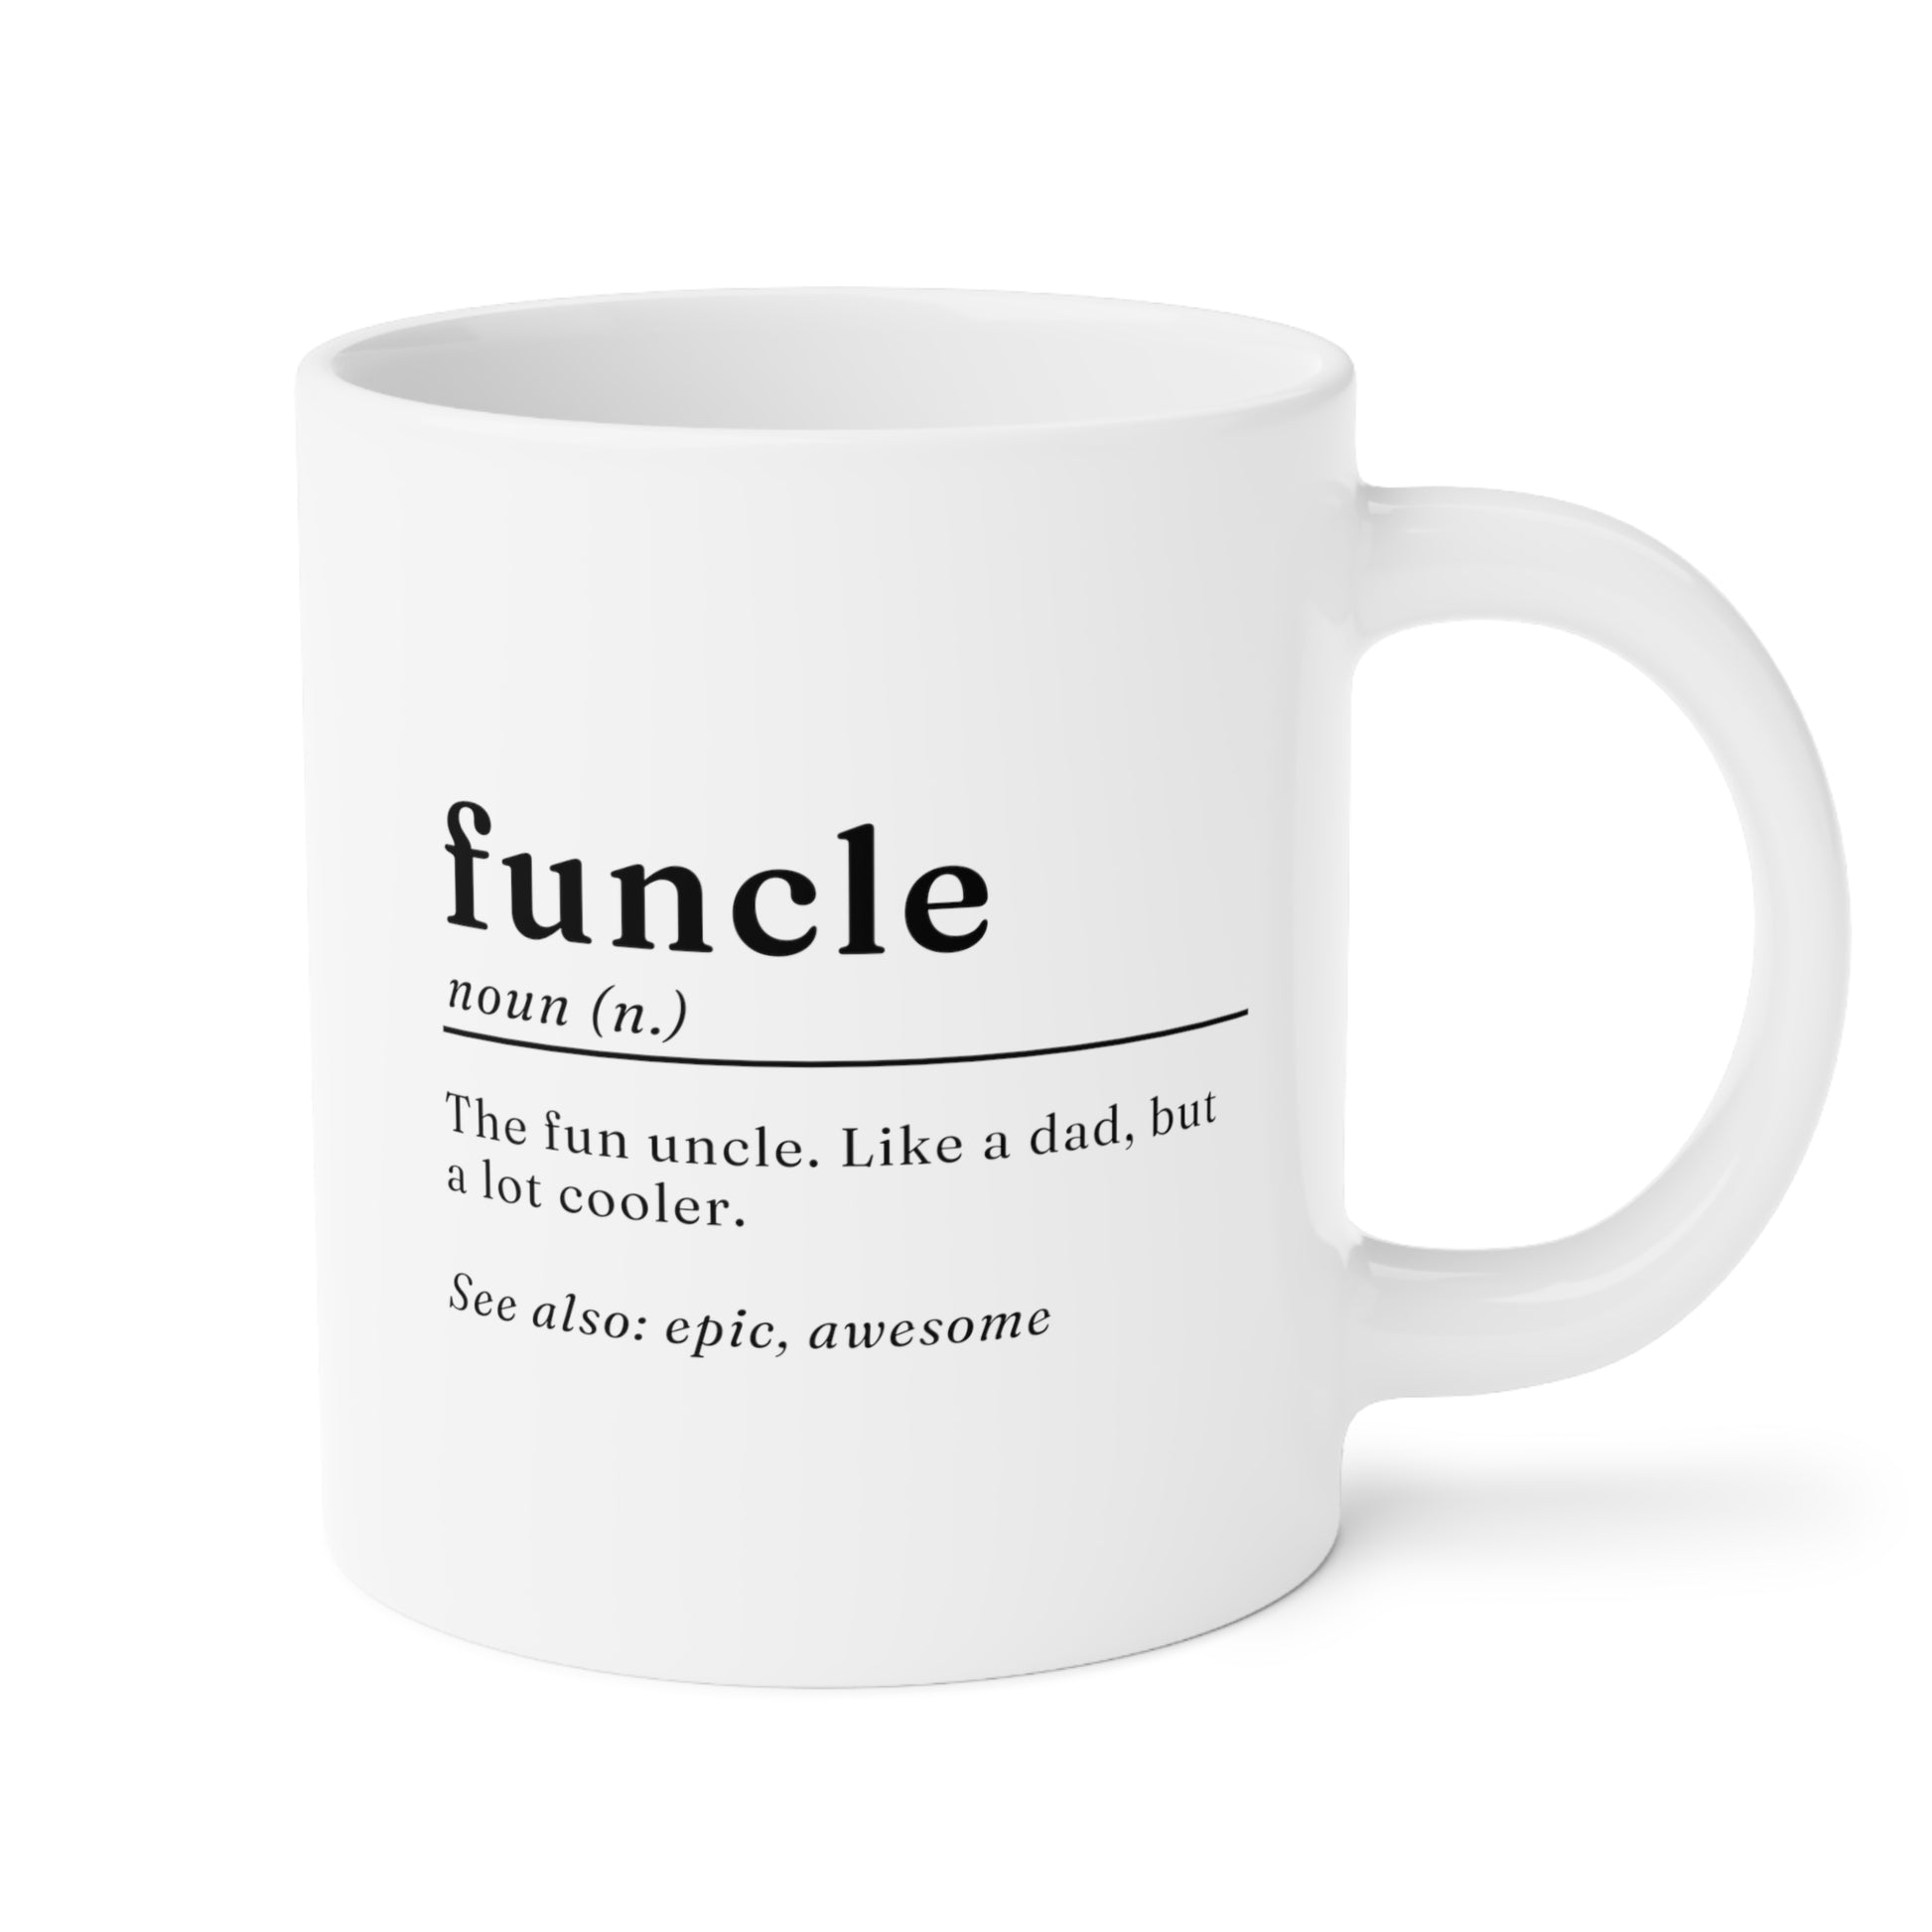 Funcle Definition 20oz white funny large coffee mug gift for fun uncle custom from niece nephew waveywares wavey wares wavywares wavy wares